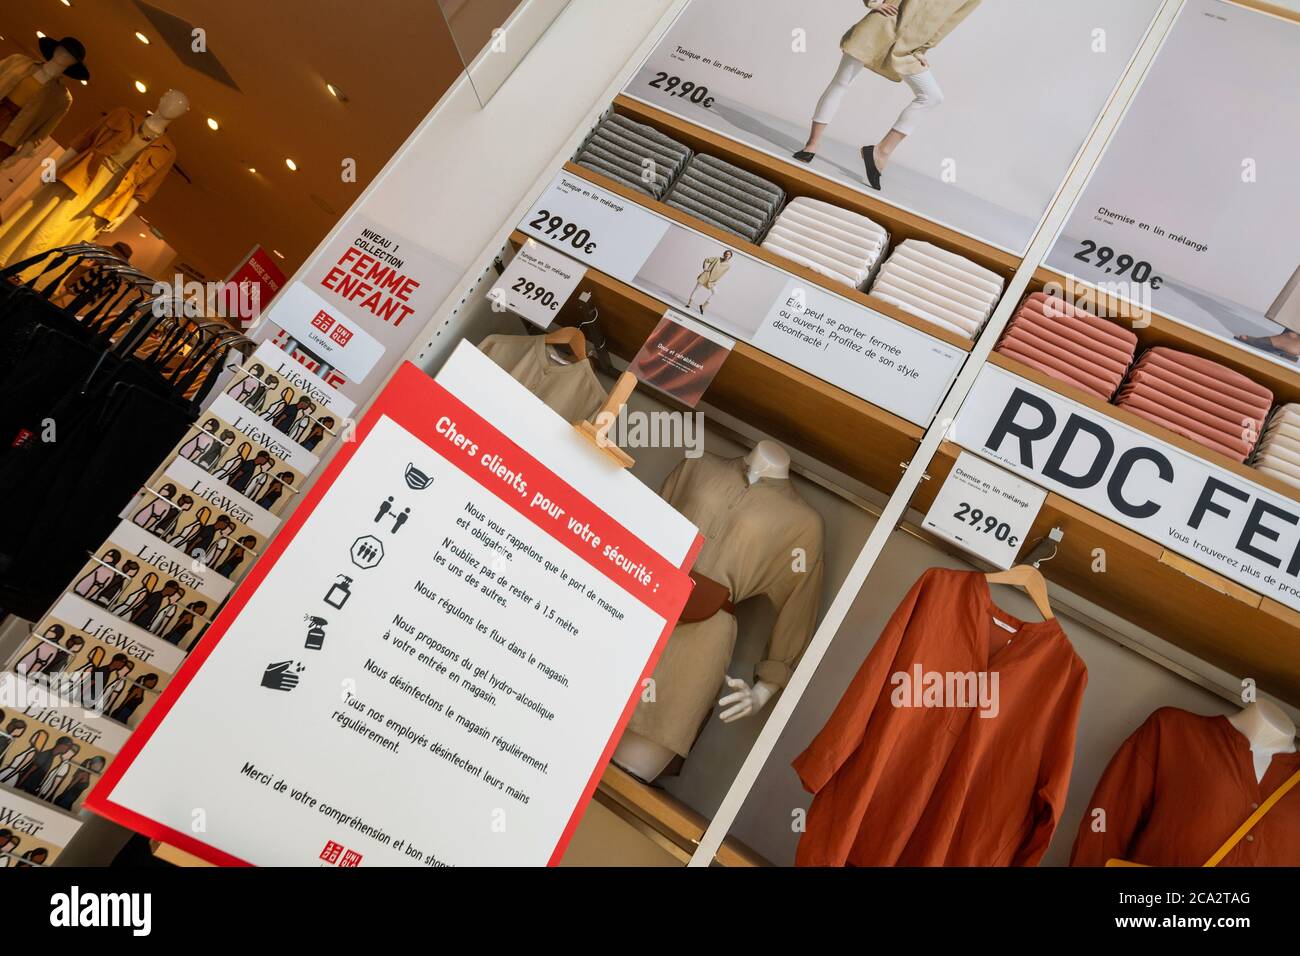 Strasbourg, France - May 30, 2020: Abstract view of Coronavirus information  advises pictograms at the entrance of UNIQLO clothes store Stock Photo -  Alamy